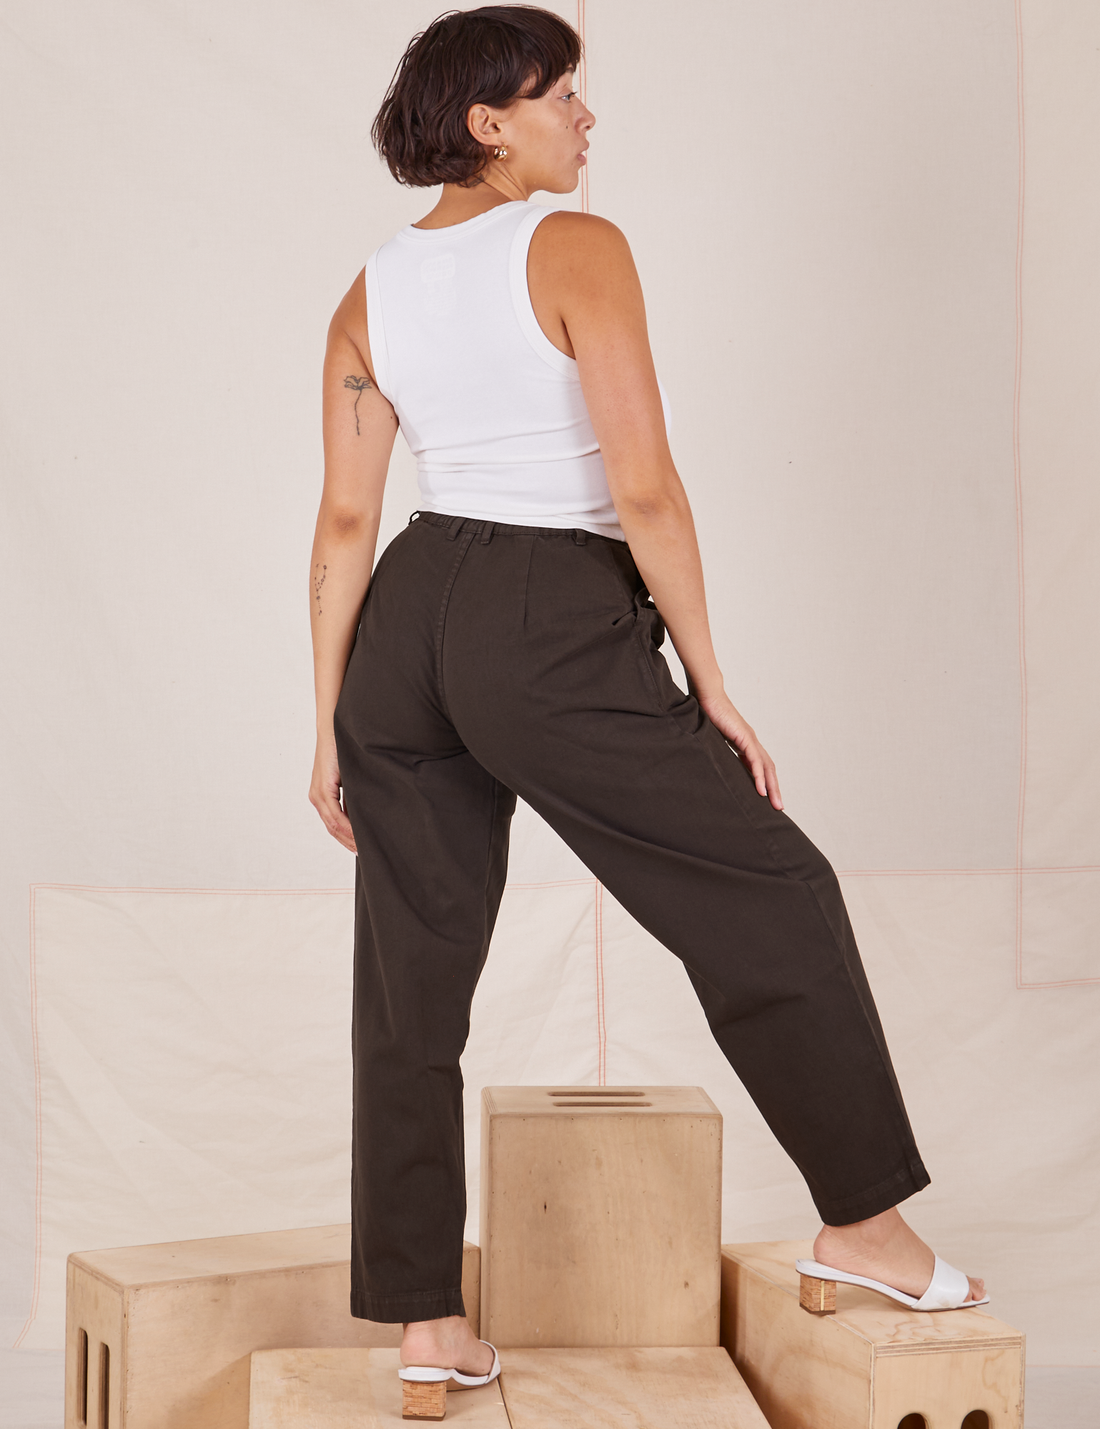 Angled back view of Heavyweight Trousers in Espresso Brown and vintage off-white Cropped Tank Top worn by Tiara.